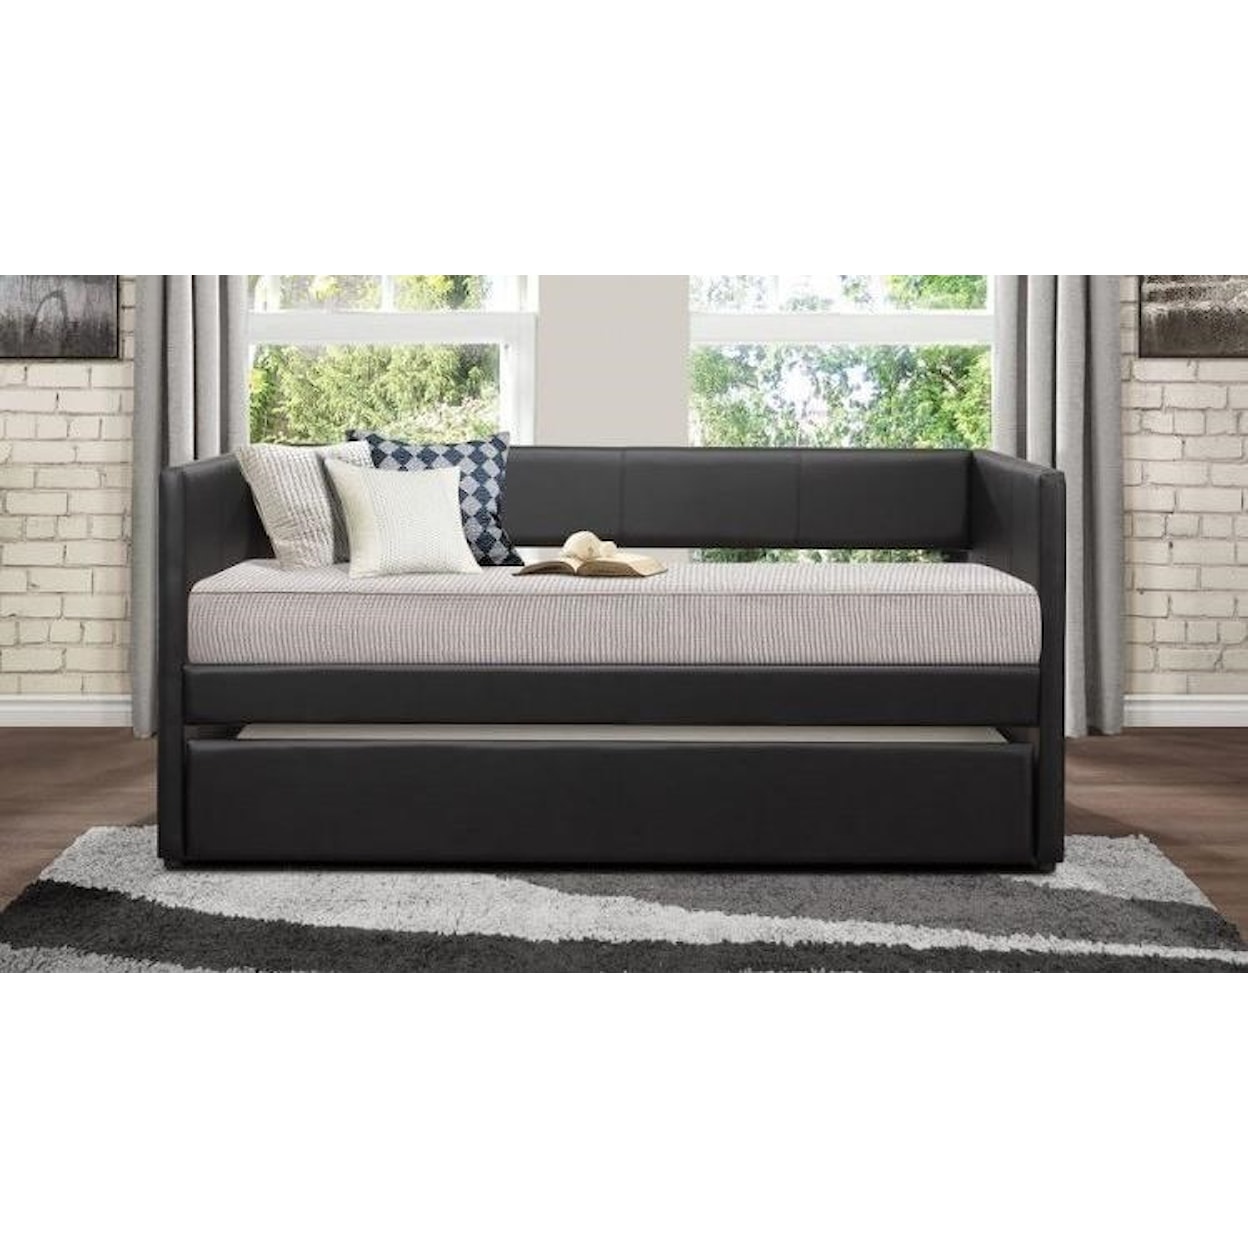 Homelegance Furniture Daybeds Adra Daybed w/ Trundle